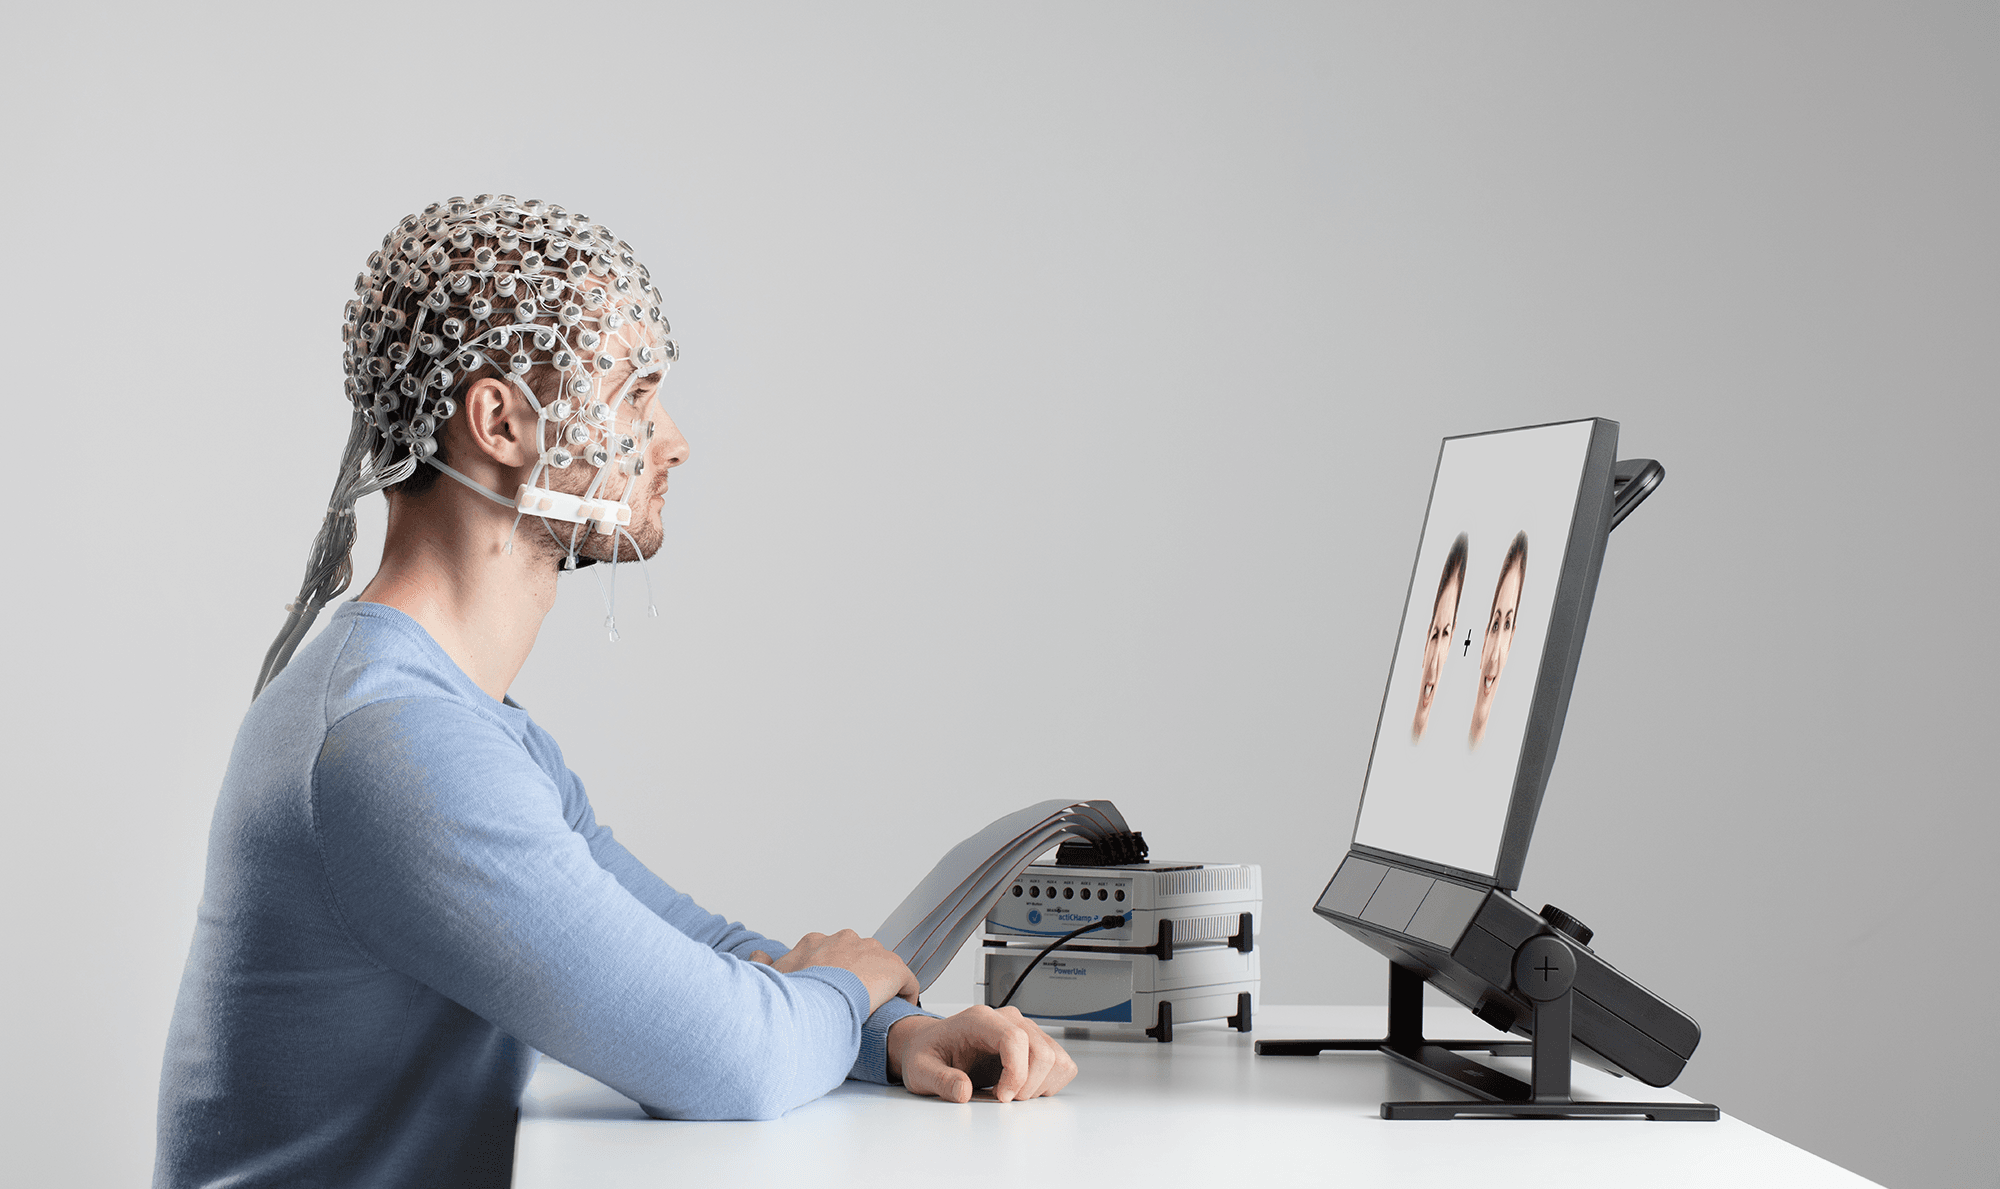 Tobii Pro Spectrum and EEG products